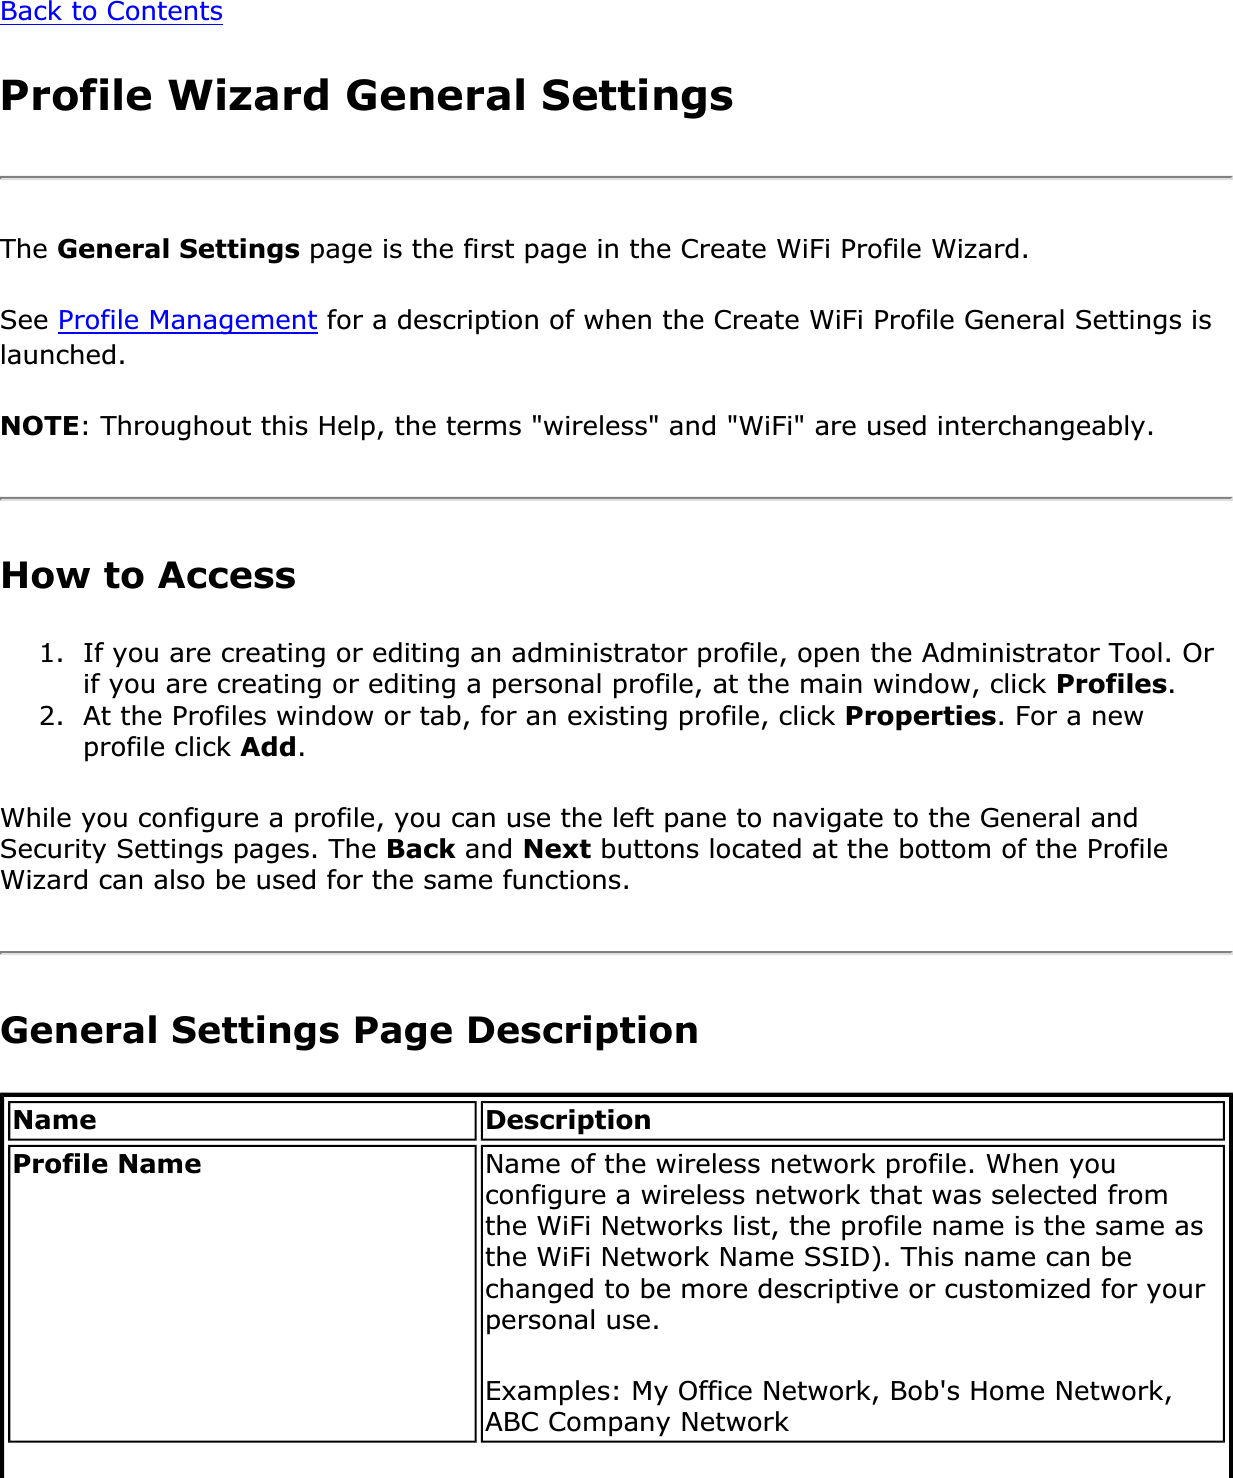 Back to ContentsProfile Wizard General SettingsThe General Settings page is the first page in the Create WiFi Profile Wizard.See Profile Management for a description of when the Create WiFi Profile General Settings is launched.NOTE: Throughout this Help, the terms &quot;wireless&quot; and &quot;WiFi&quot; are used interchangeably. How to Access 1. If you are creating or editing an administrator profile, open the Administrator Tool. Or if you are creating or editing a personal profile, at the main window, click Profiles.2. At the Profiles window or tab, for an existing profile, click Properties. For a new profile click Add.While you configure a profile, you can use the left pane to navigate to the General and Security Settings pages. The Back and Next buttons located at the bottom of the Profile Wizard can also be used for the same functions.General Settings Page DescriptionName DescriptionProfile Name Name of the wireless network profile. When you configure a wireless network that was selected from the WiFi Networks list, the profile name is the same as the WiFi Network Name SSID). This name can be changed to be more descriptive or customized for your personal use.Examples: My Office Network, Bob&apos;s Home Network, ABC Company Network